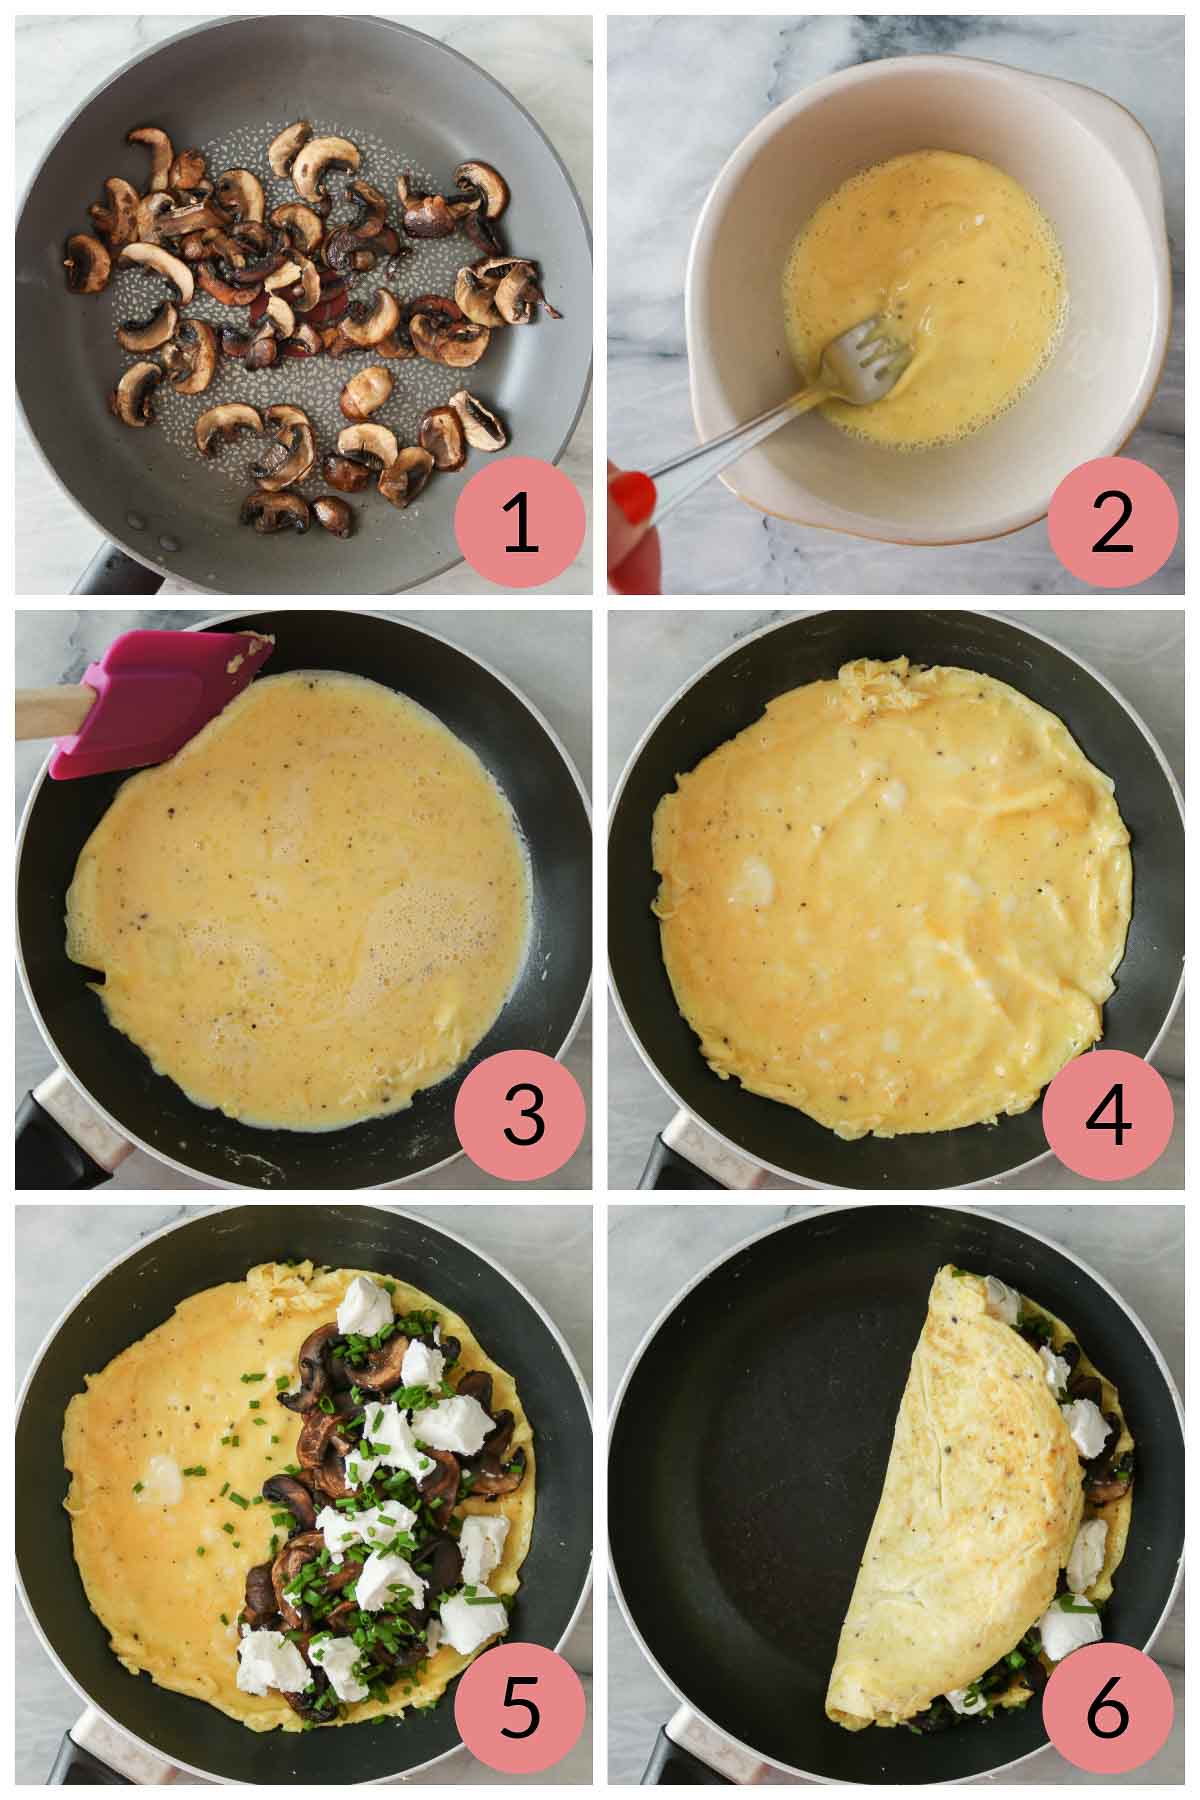 Collage of steps to make an omelette with goat cheese and mushrooms.